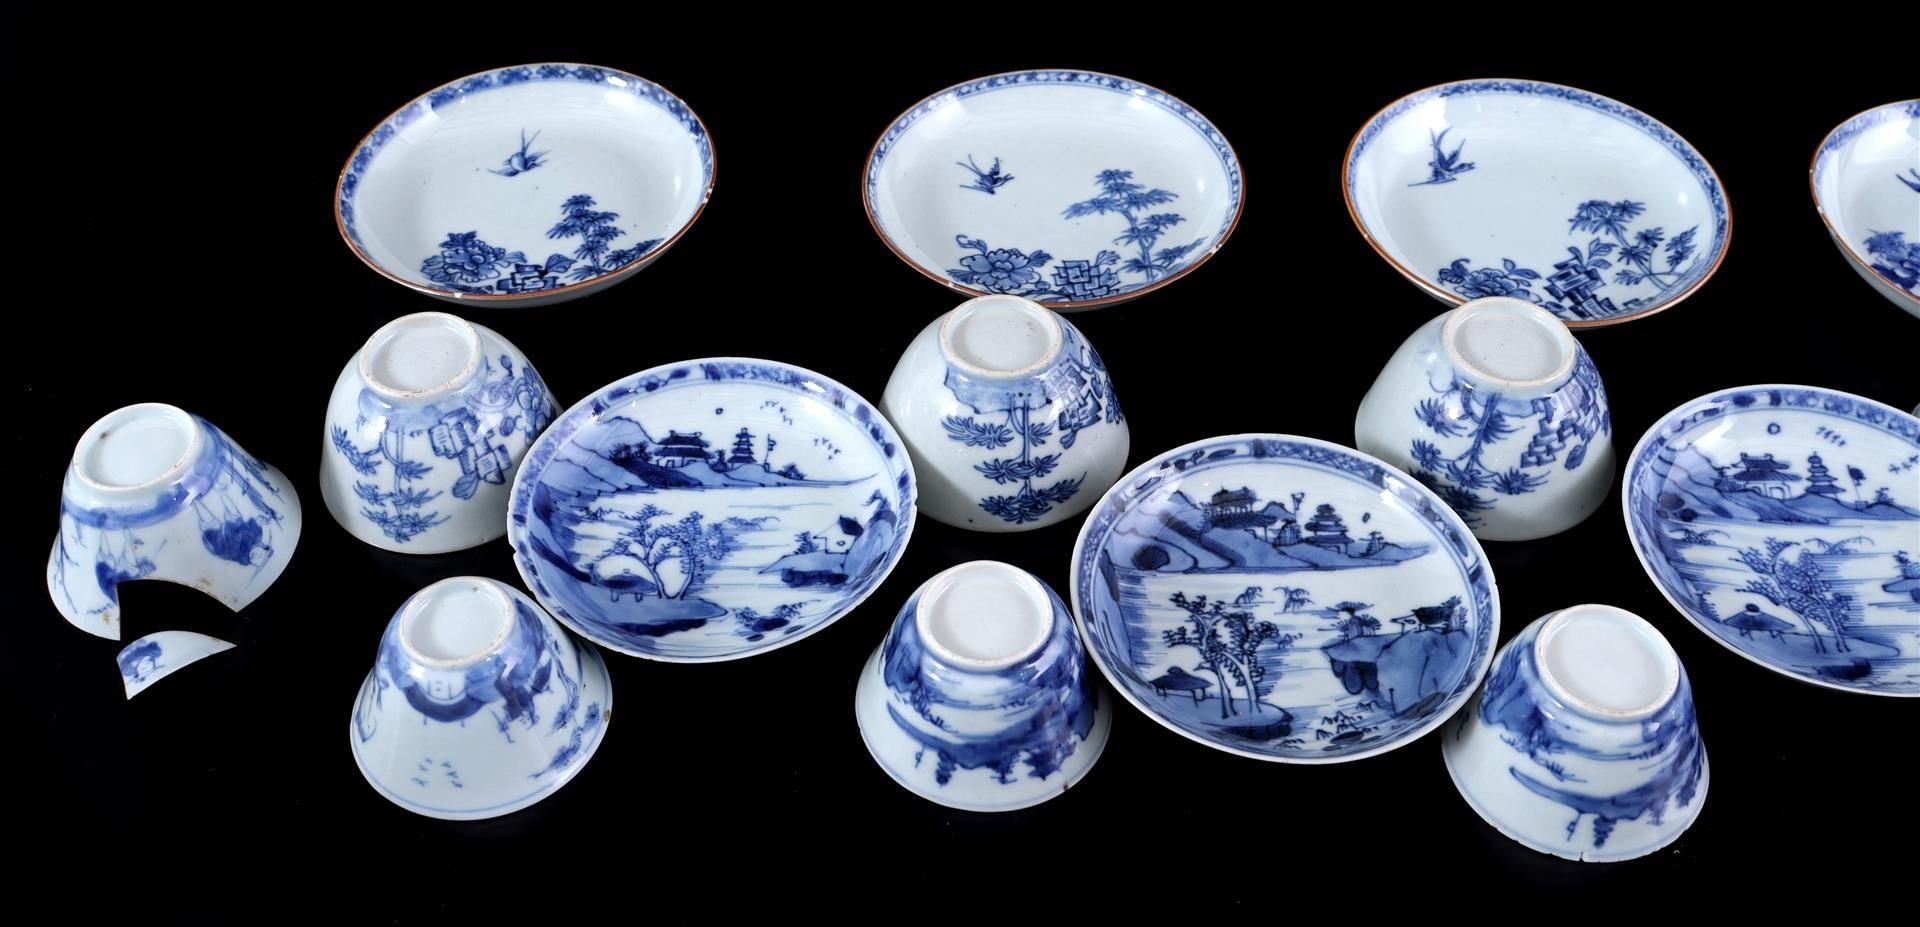 Lot of porcelain bowls and saucers with blue decor - Image 4 of 4